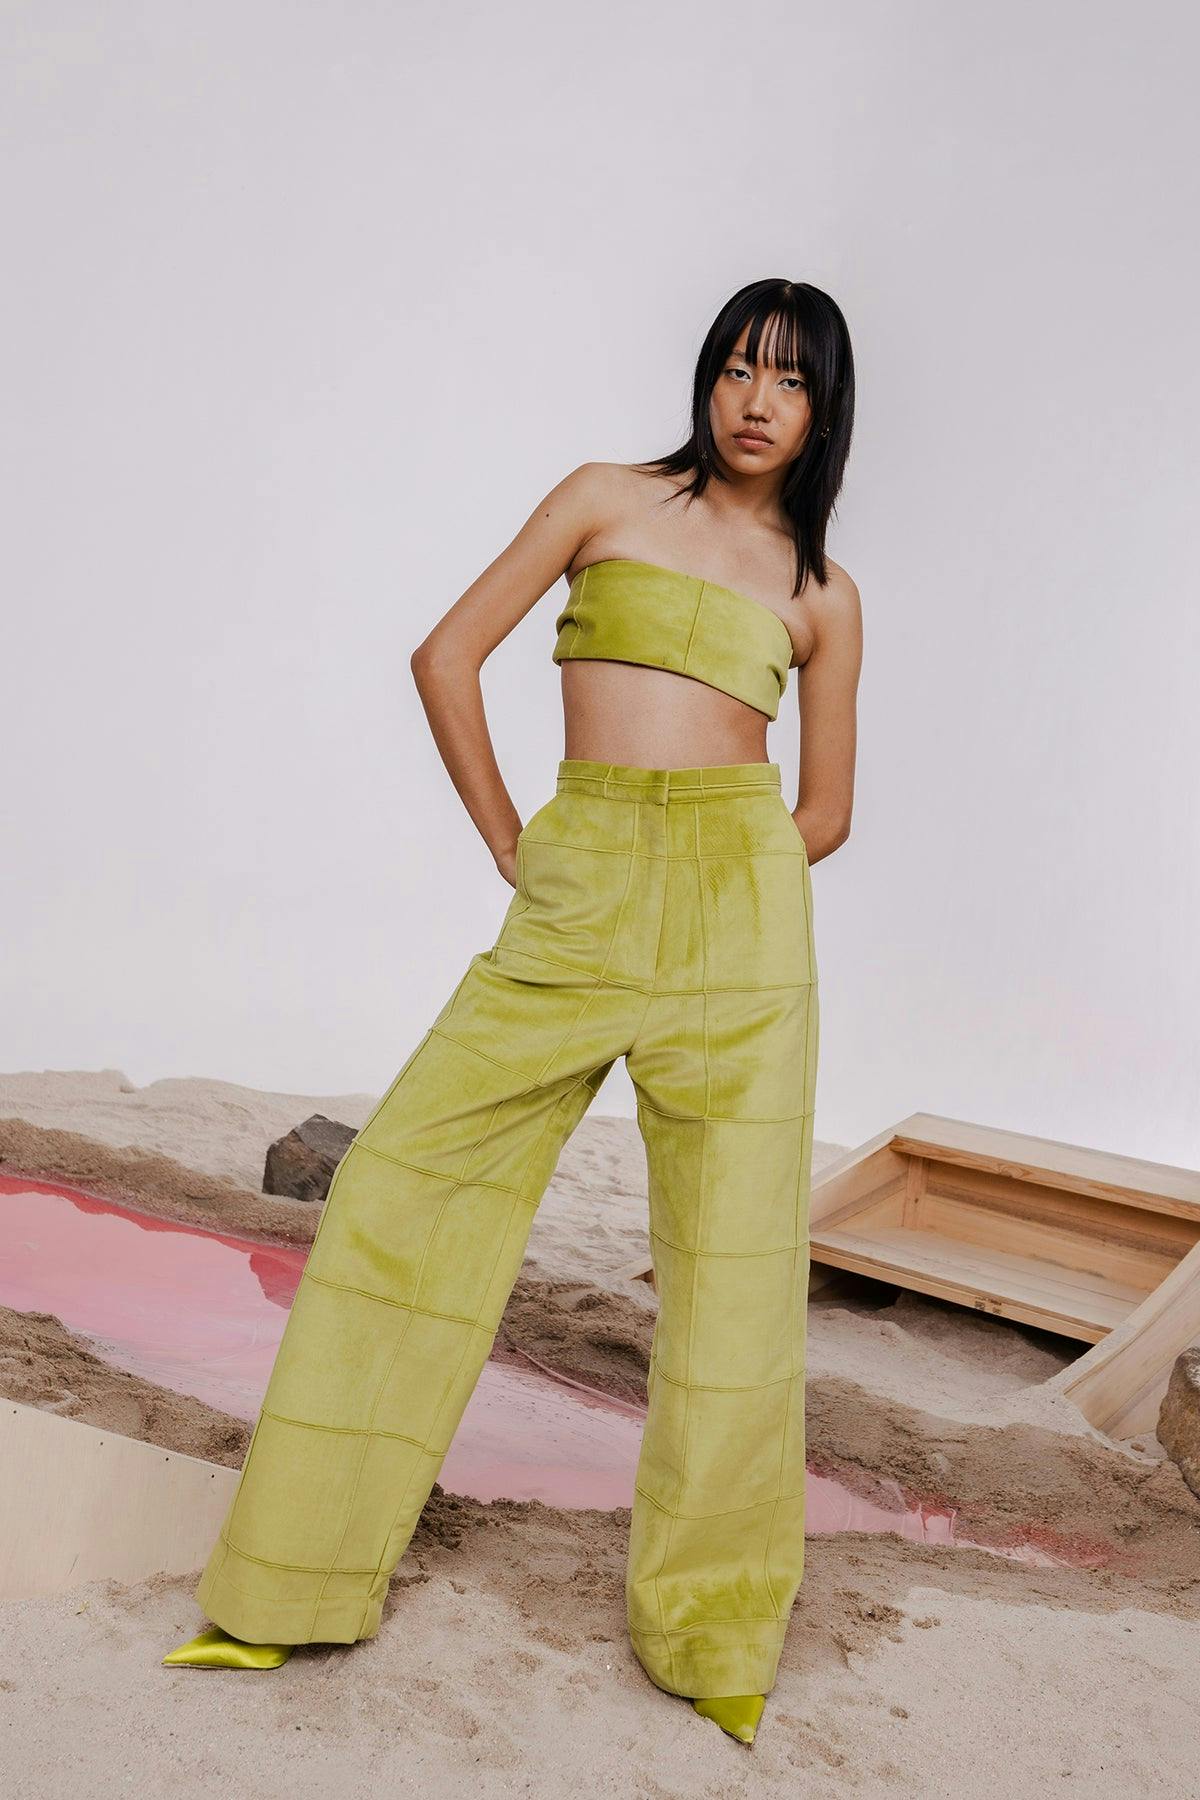 COVA PEA GREEN BOMBER JACKET WITH BANDEAU & PANTS, a product by July Issue